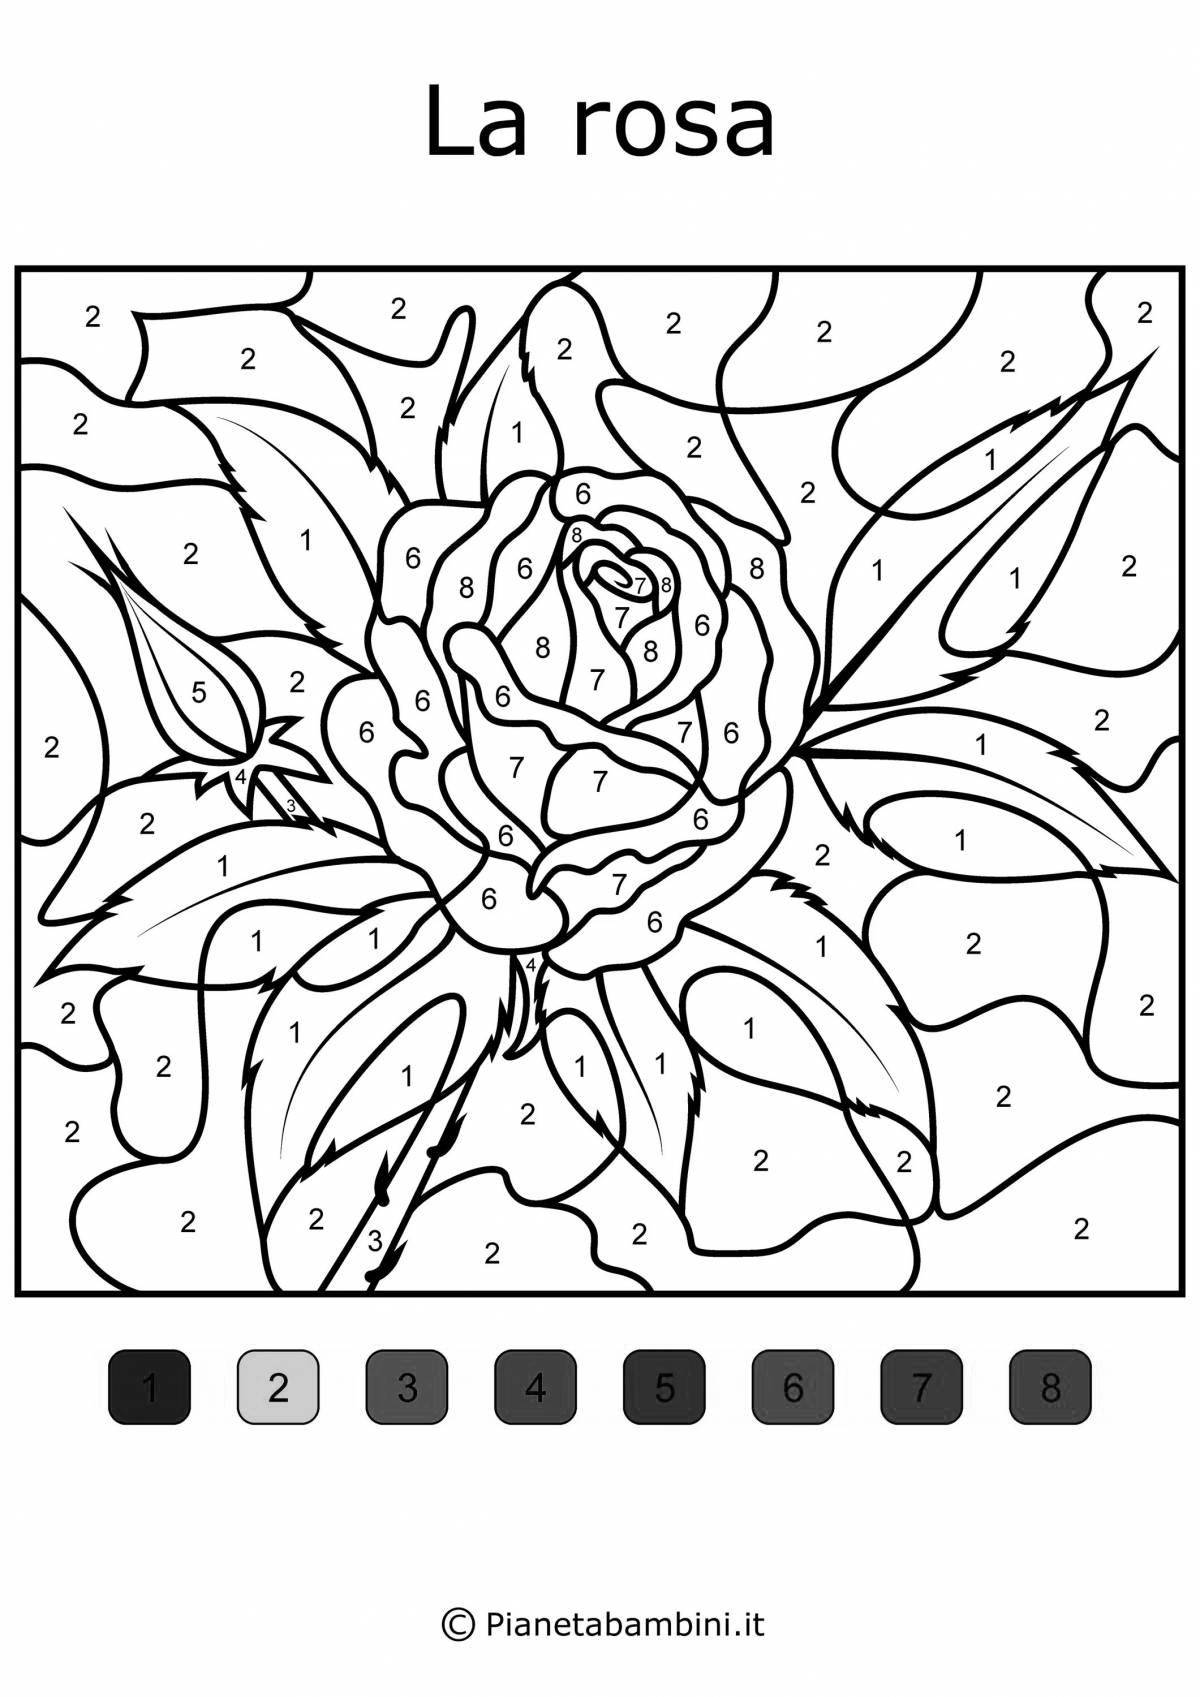 Relaxing coloring by numbers for everyone